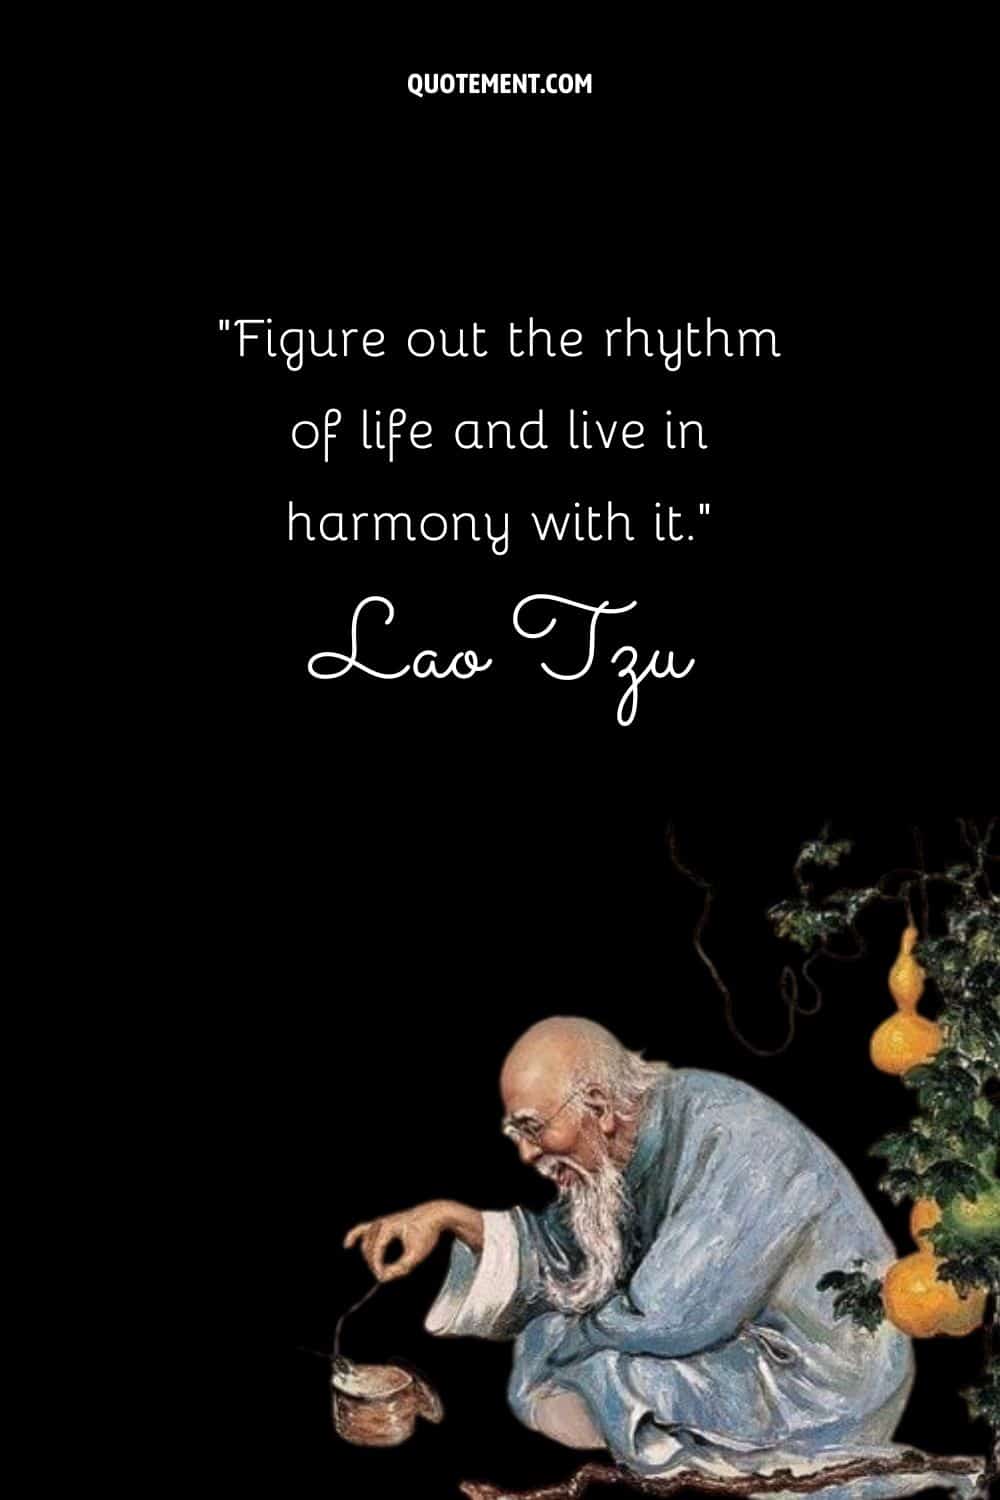 Figure out the rhythm of life and live in harmony with it.